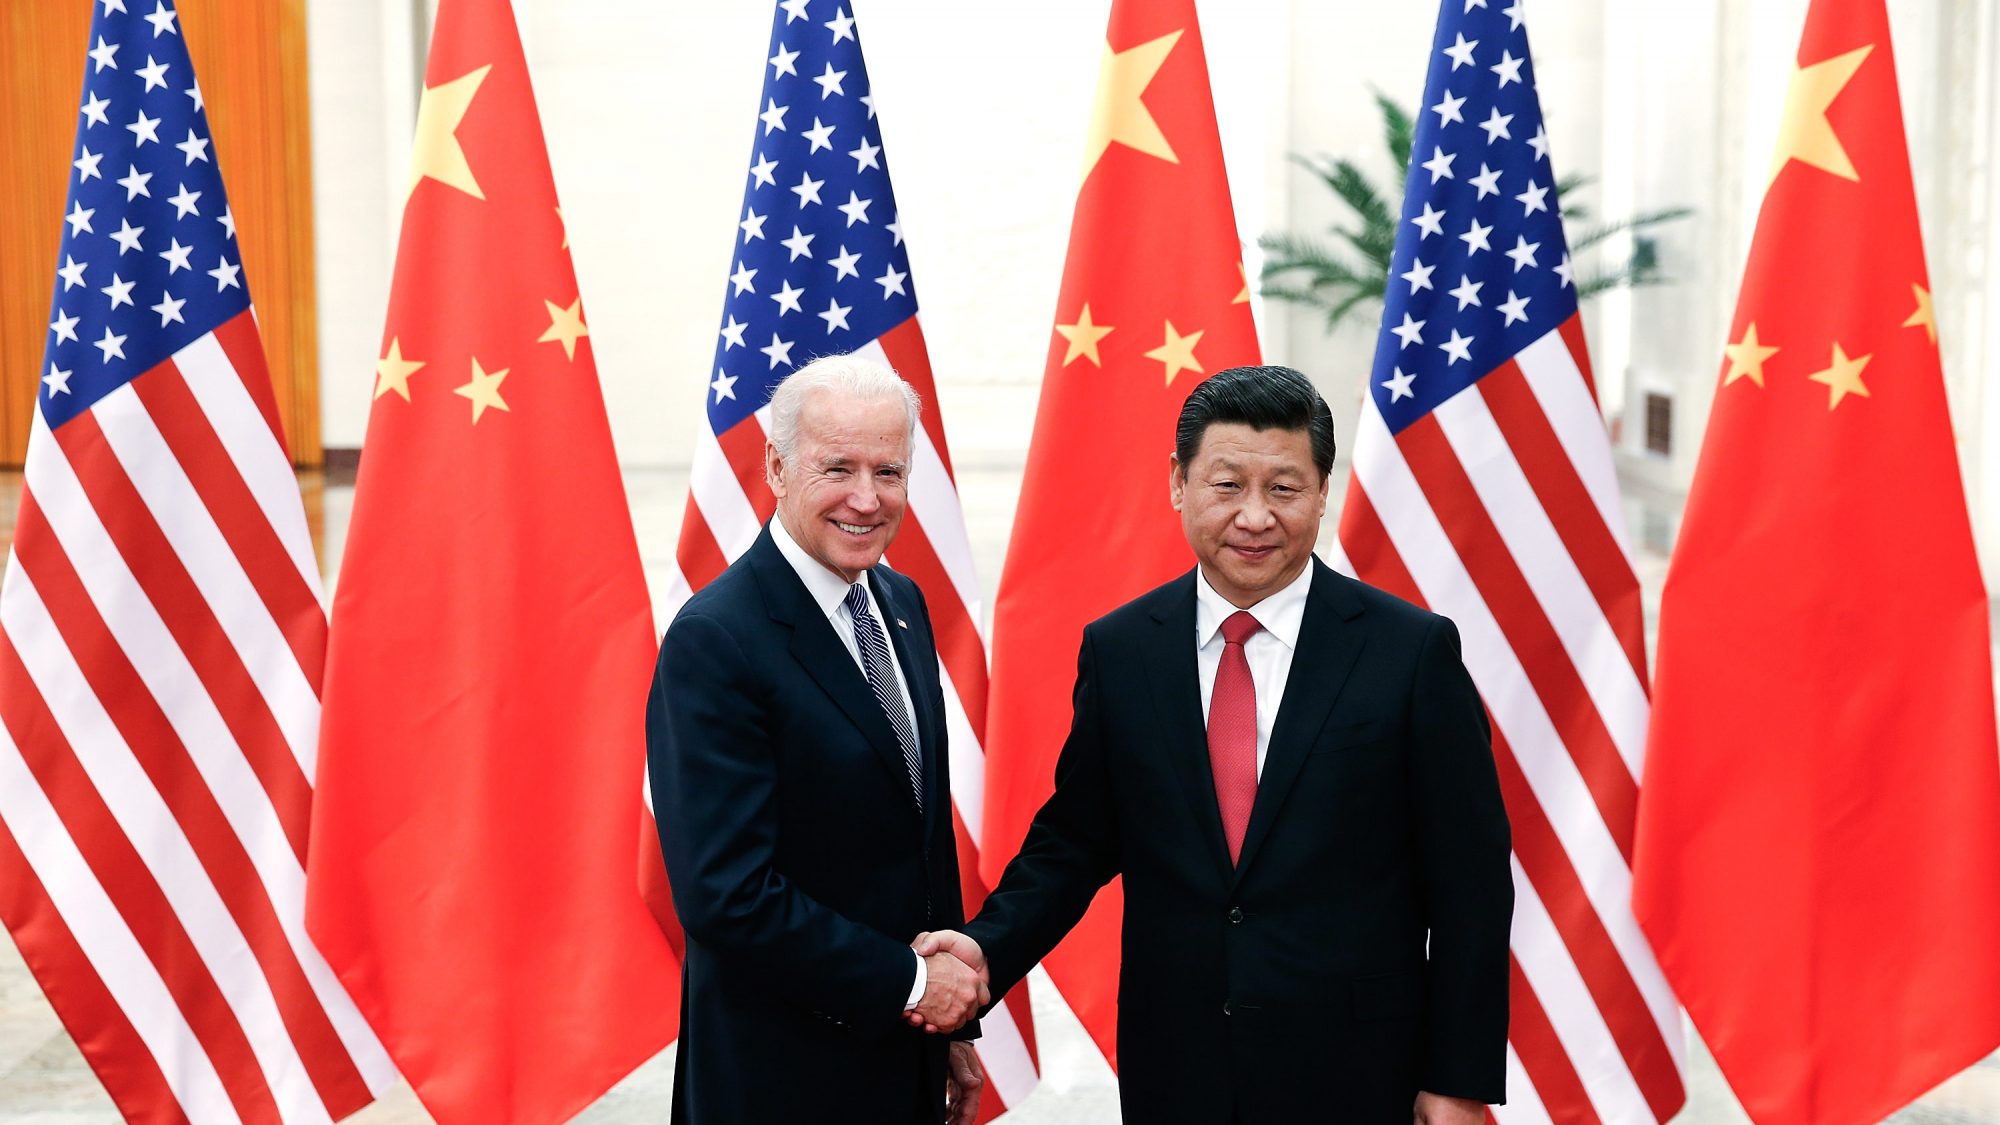 Xi and Biden shake hands in front of Chinese and American flags